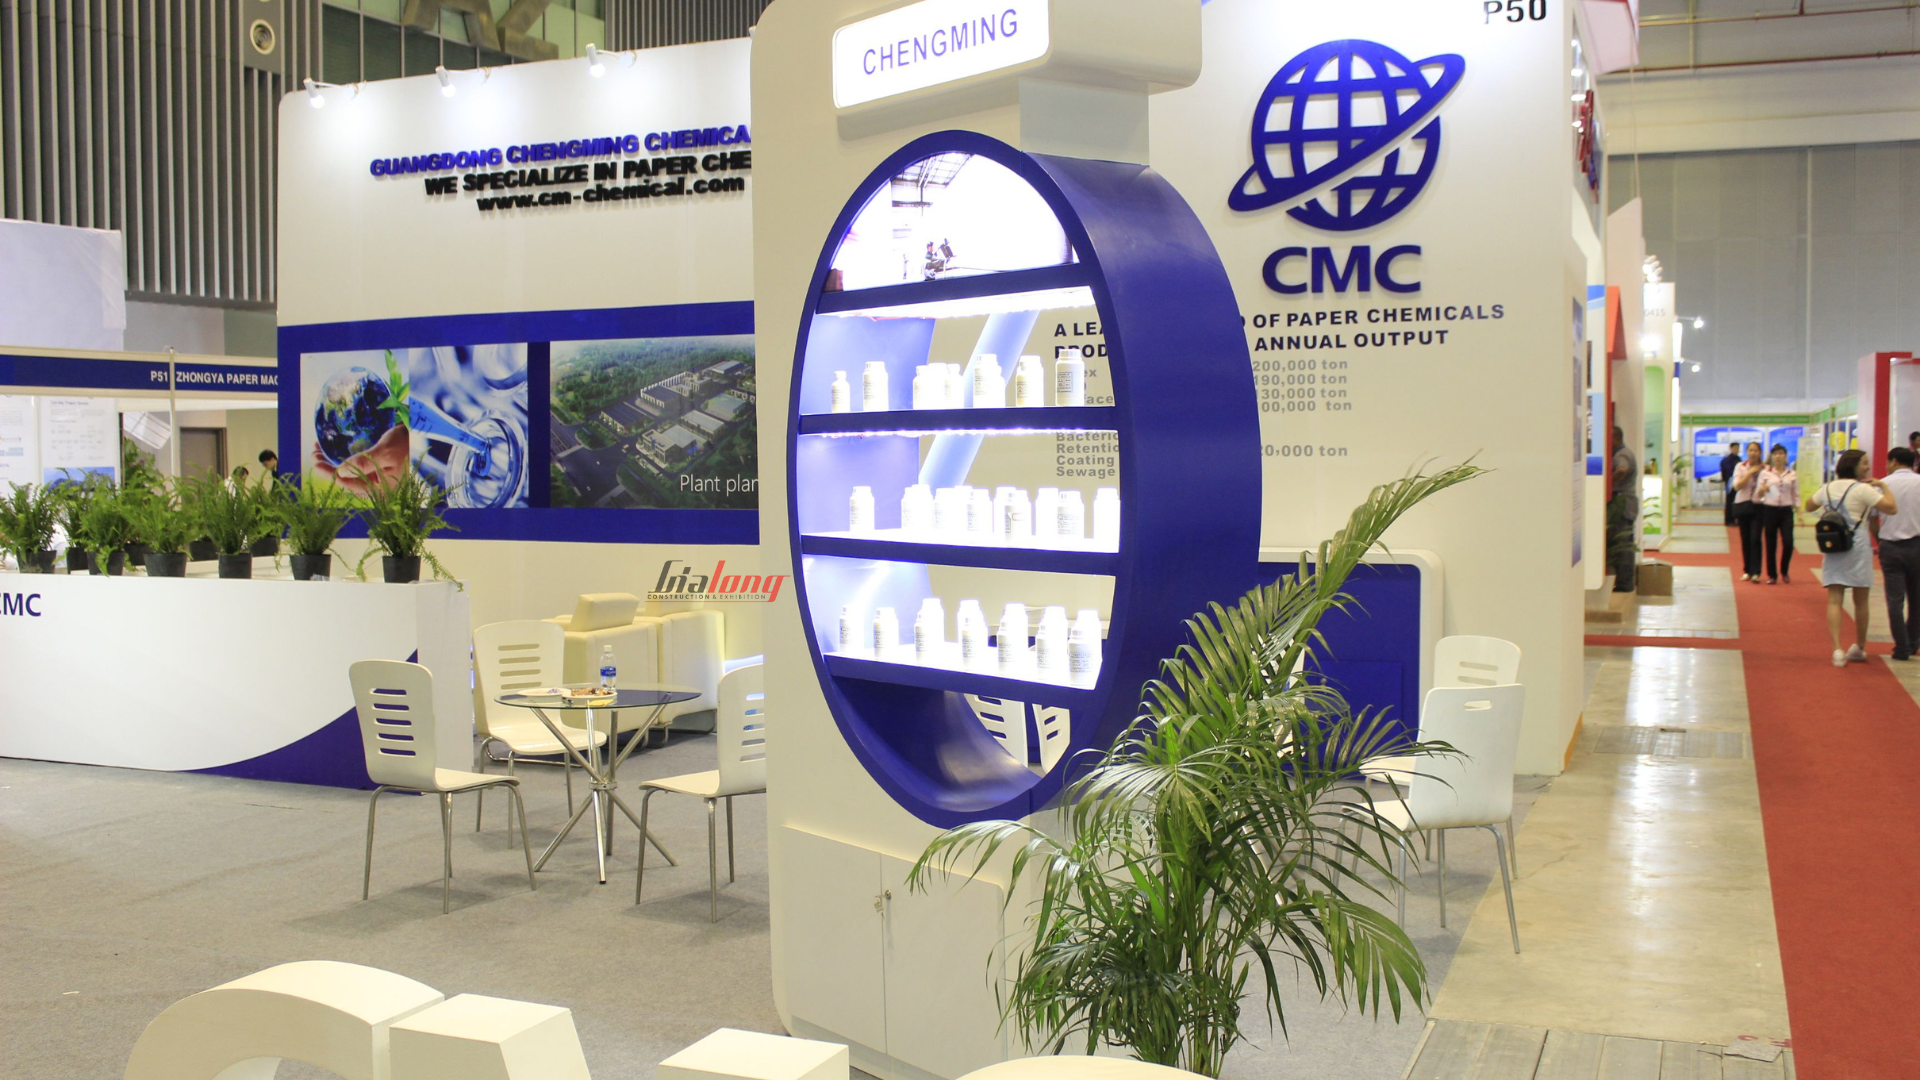 CMC - The booth was constructed and designed by Gia Long